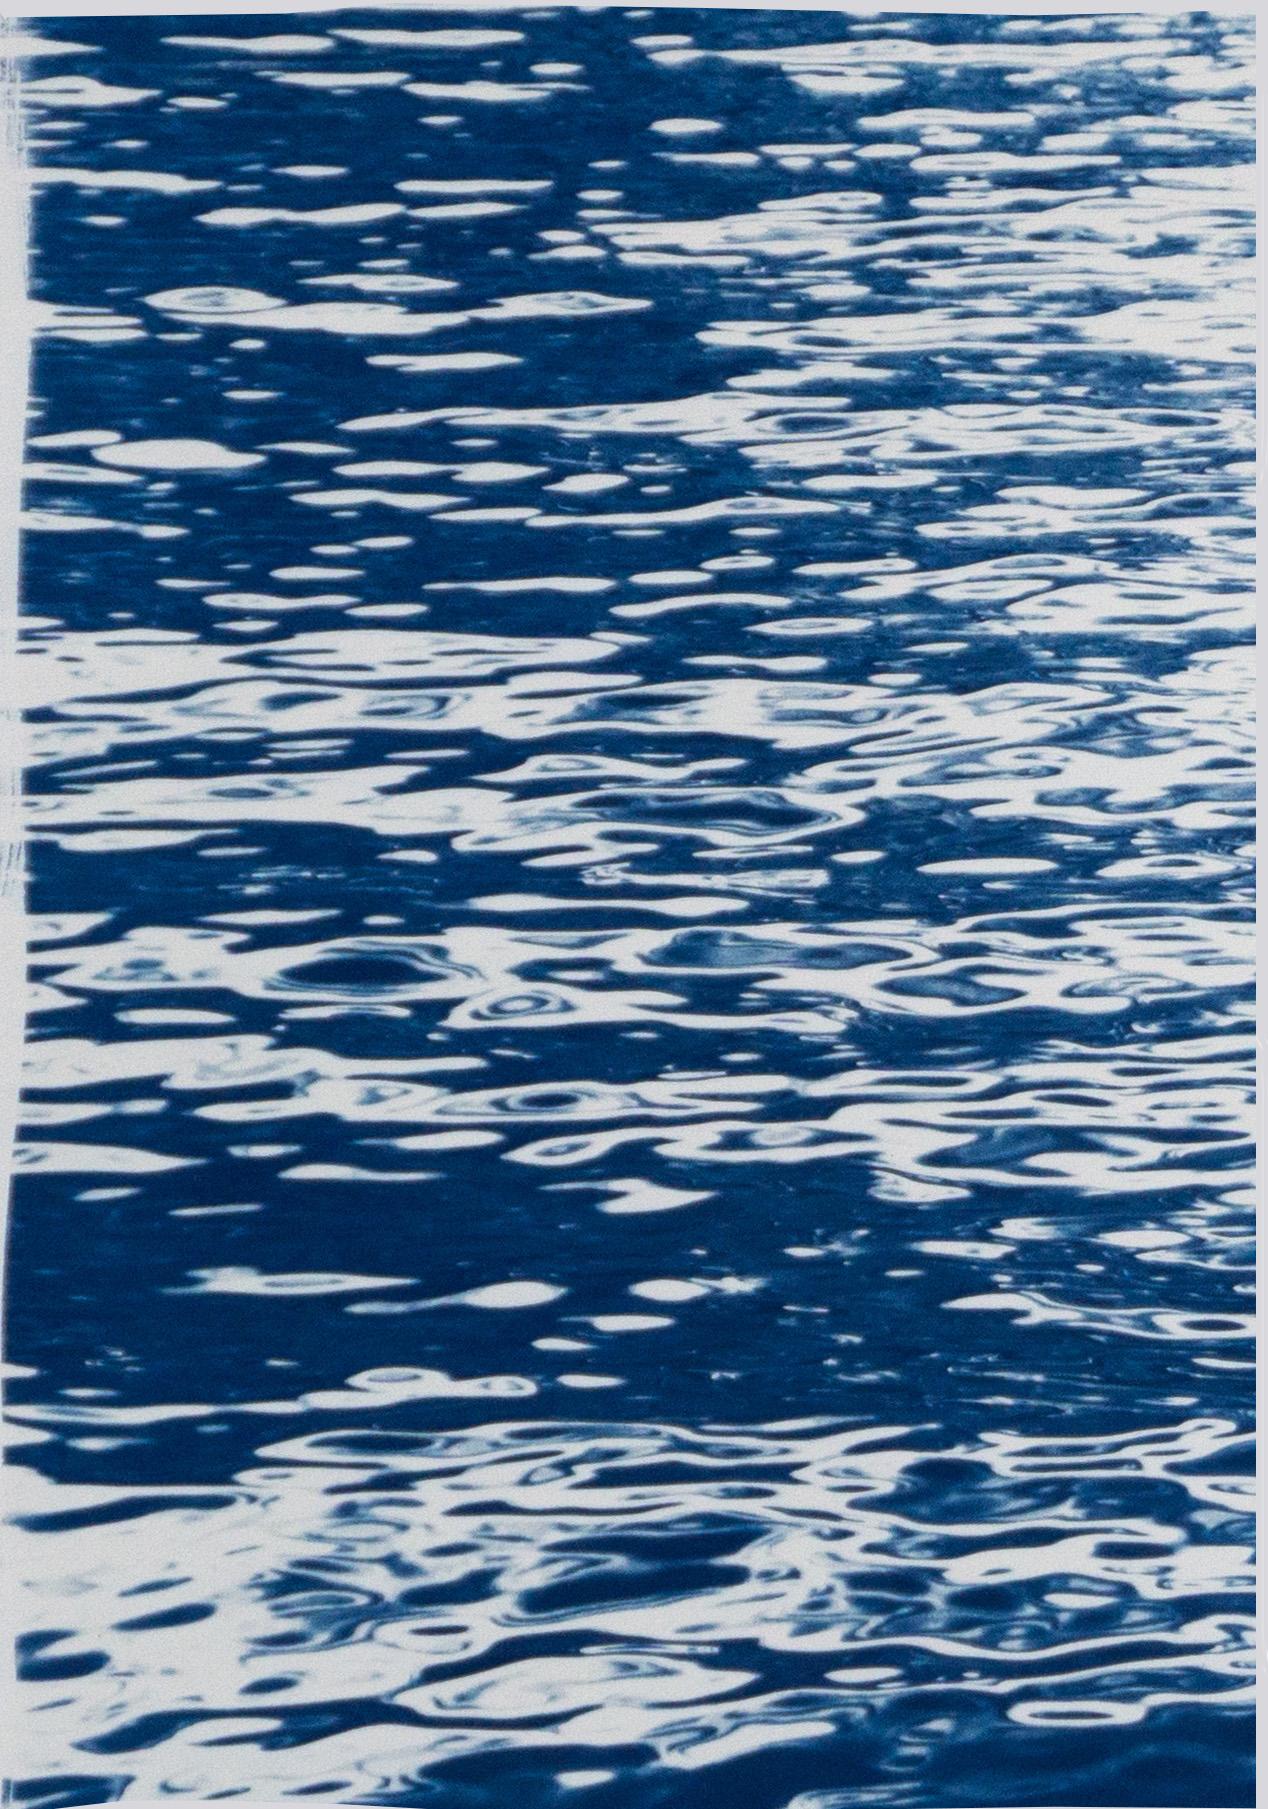 Moonlight Ripples over Lake Como, Nautical Cyanotype Triptych of Moving Water - Contemporary Photograph by Kind of Cyan